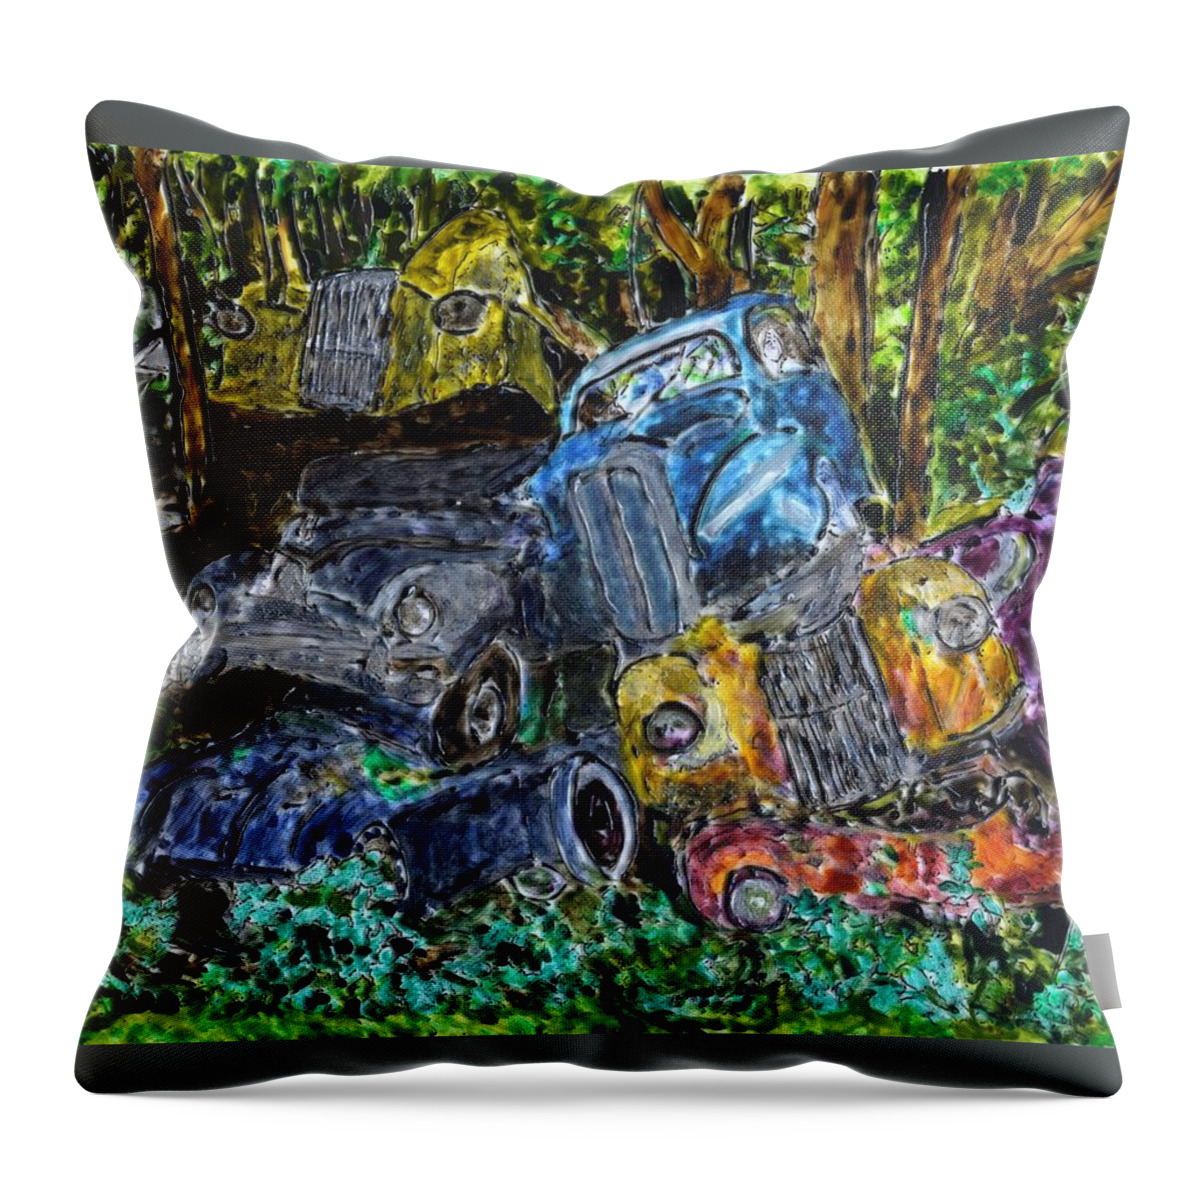 Scrapyard Throw Pillow featuring the painting Swedish Scrapyard by Phil Strang